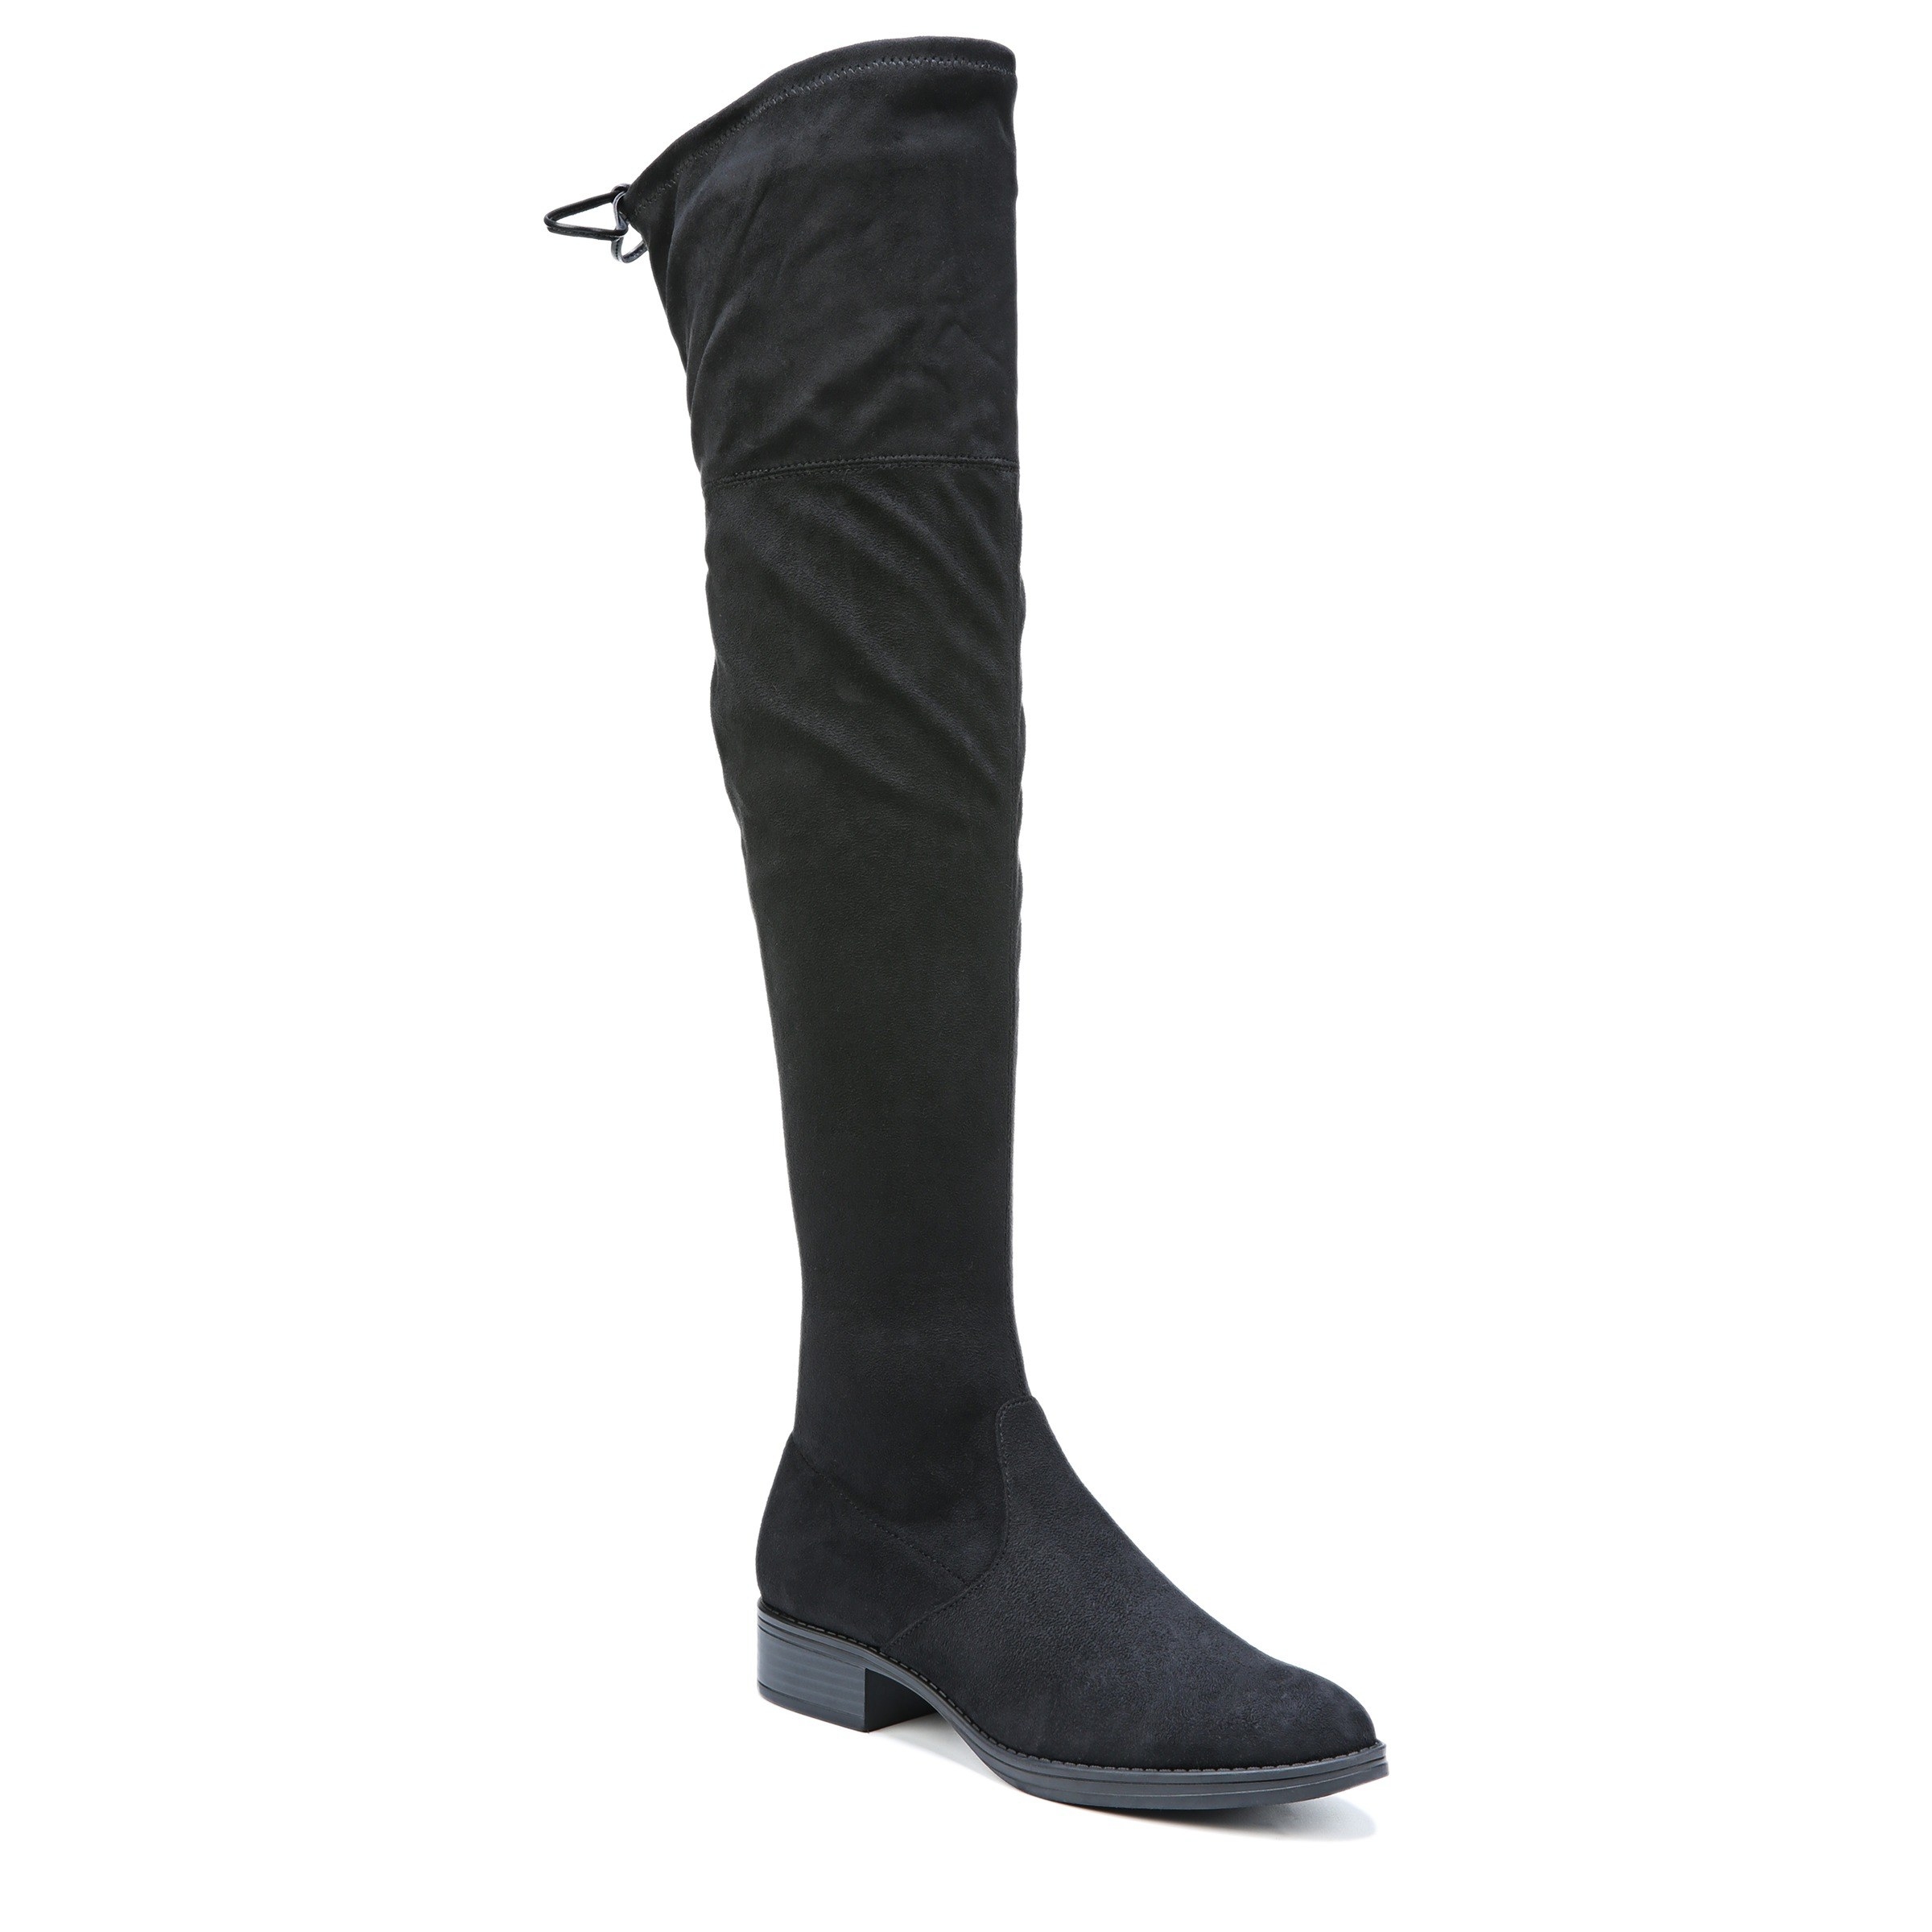 The black tall boots